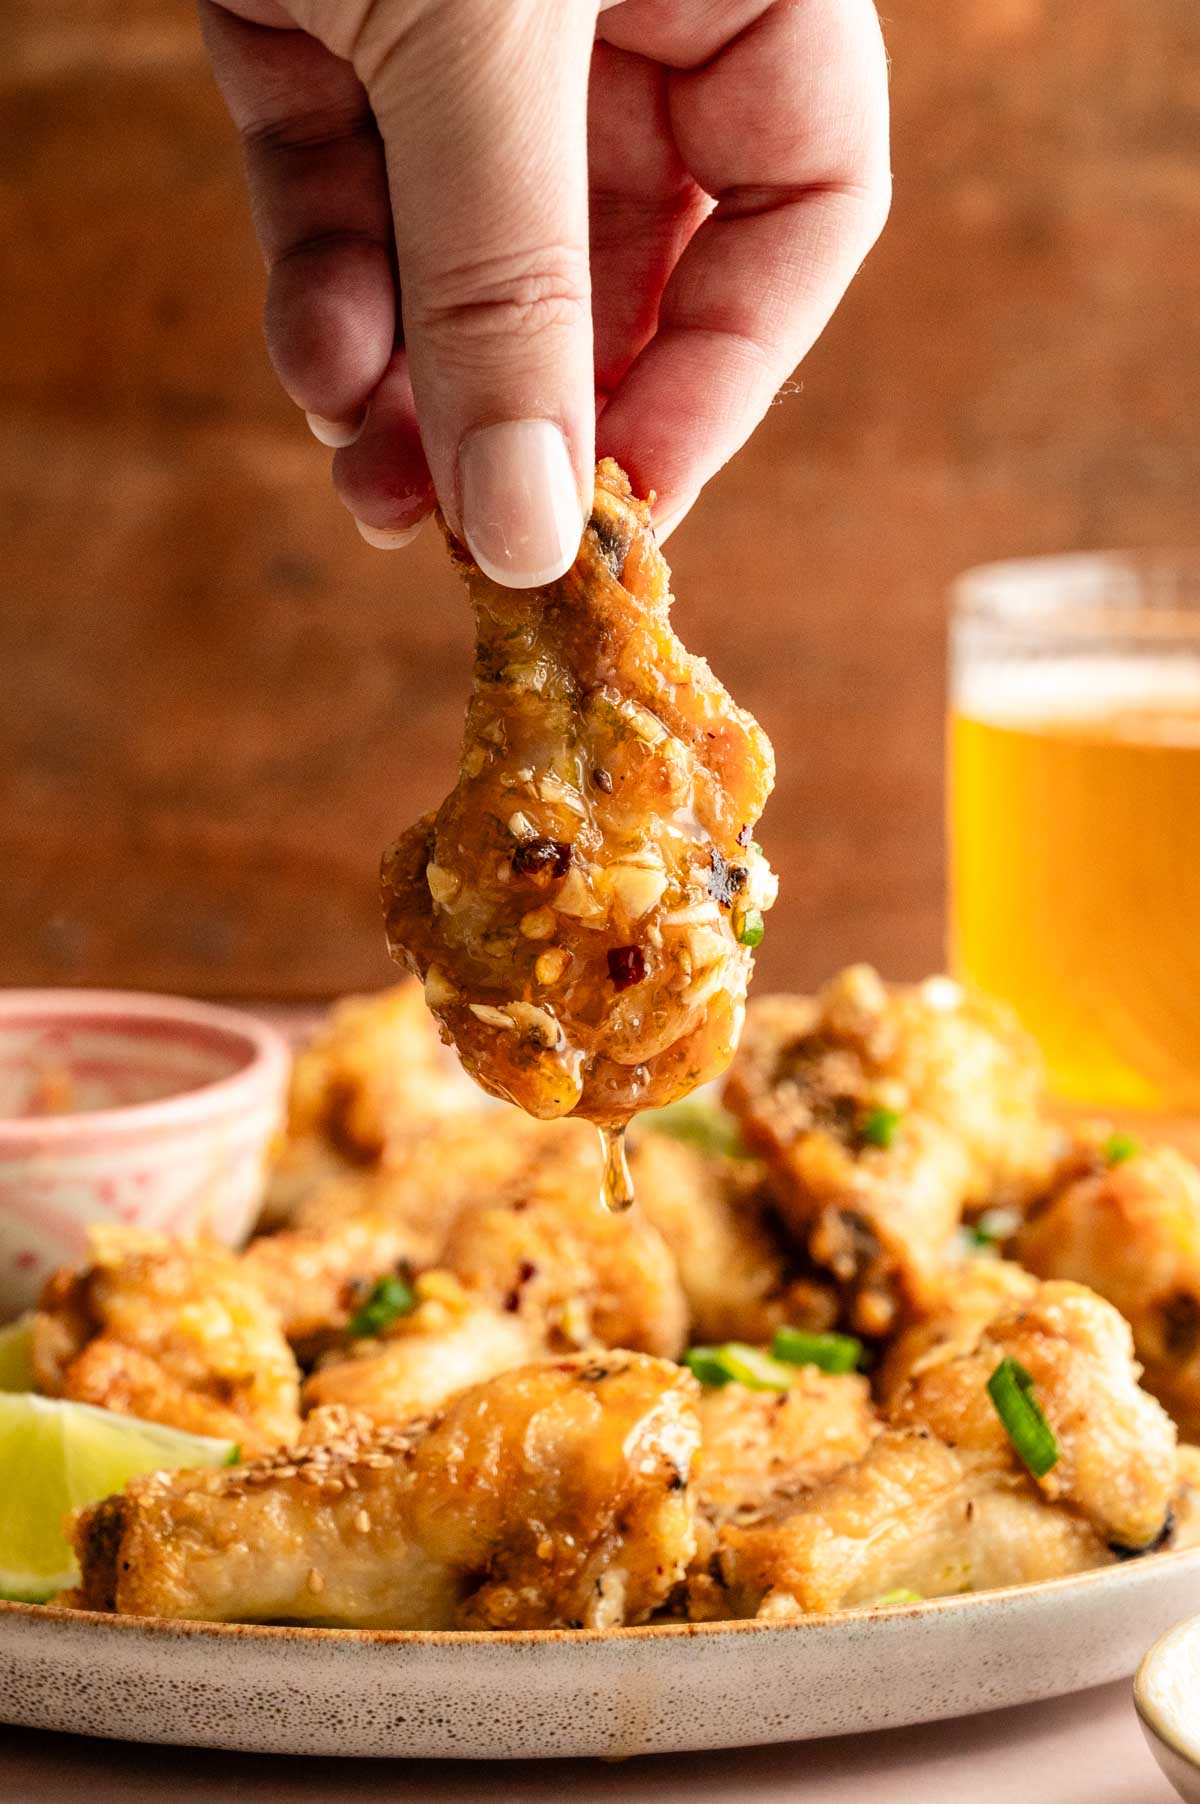 Holding a chicken wing with dripping honey